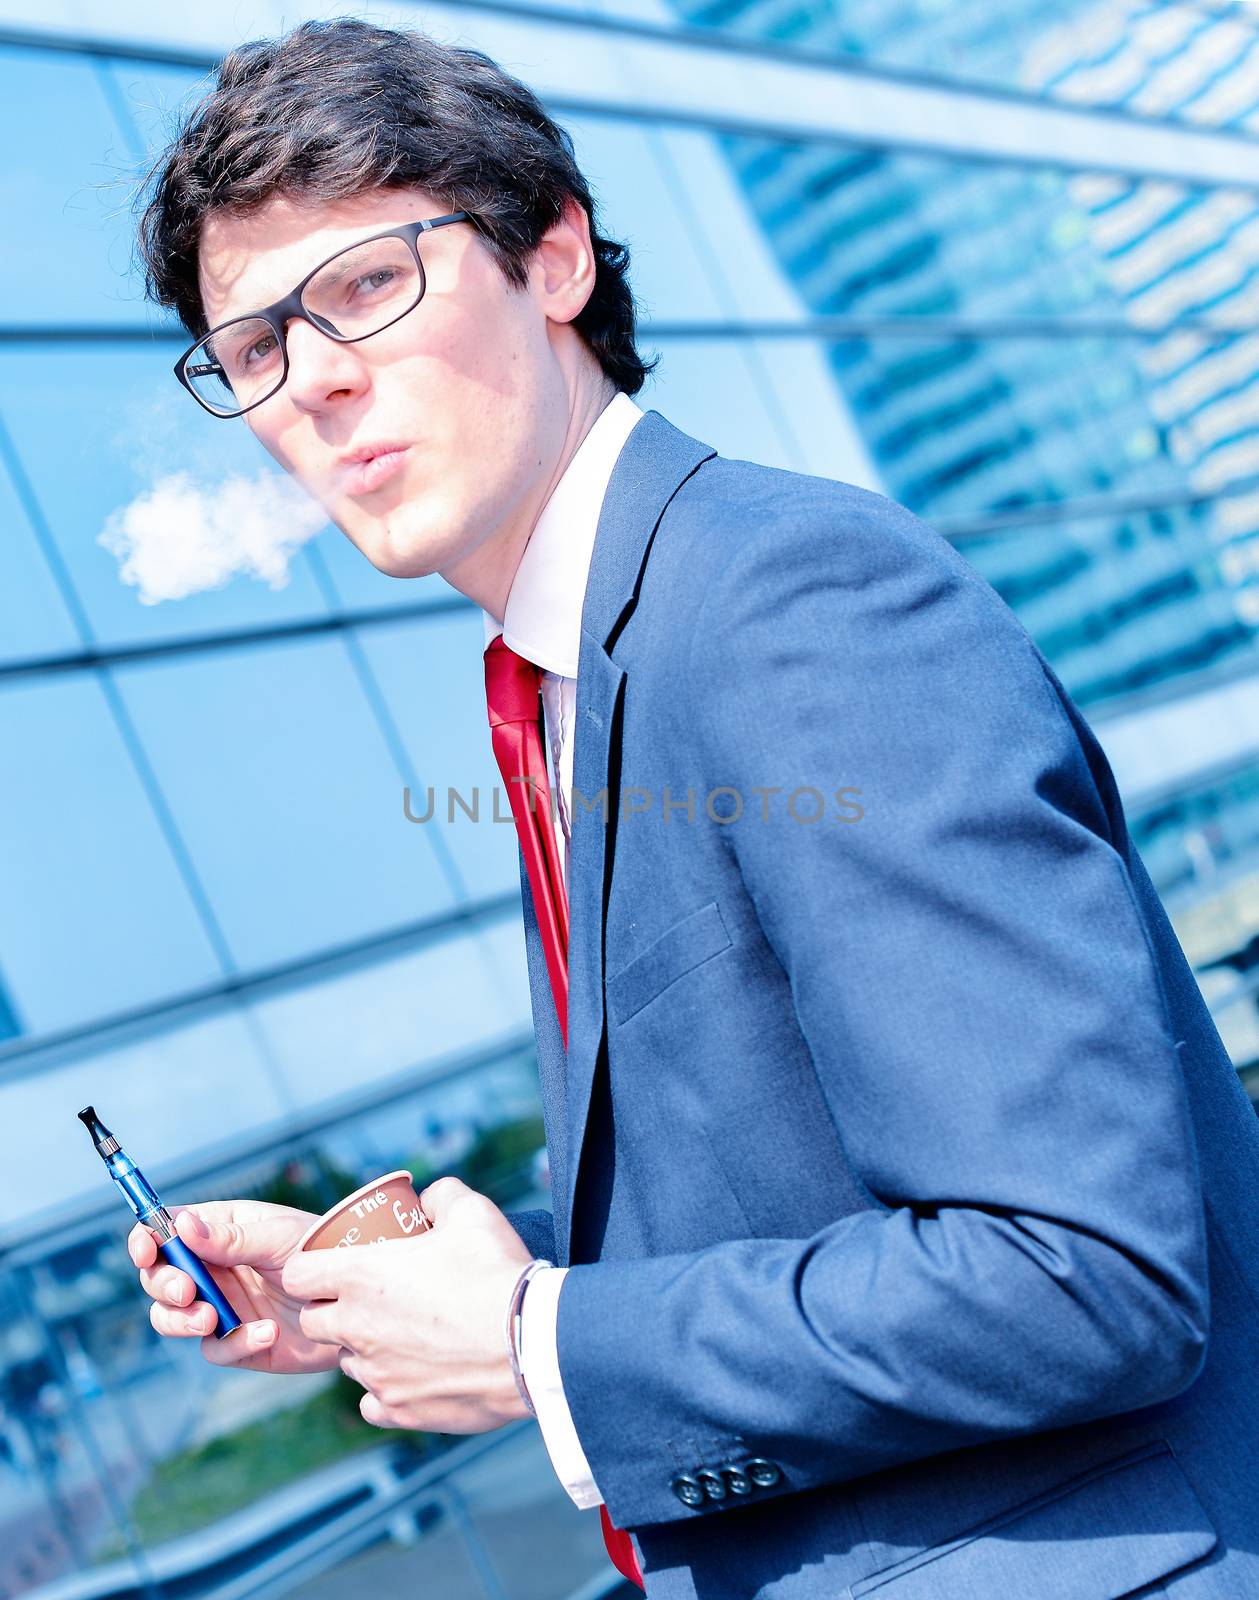 Nice portrait of young worker during coffee break with an electronic cigarette